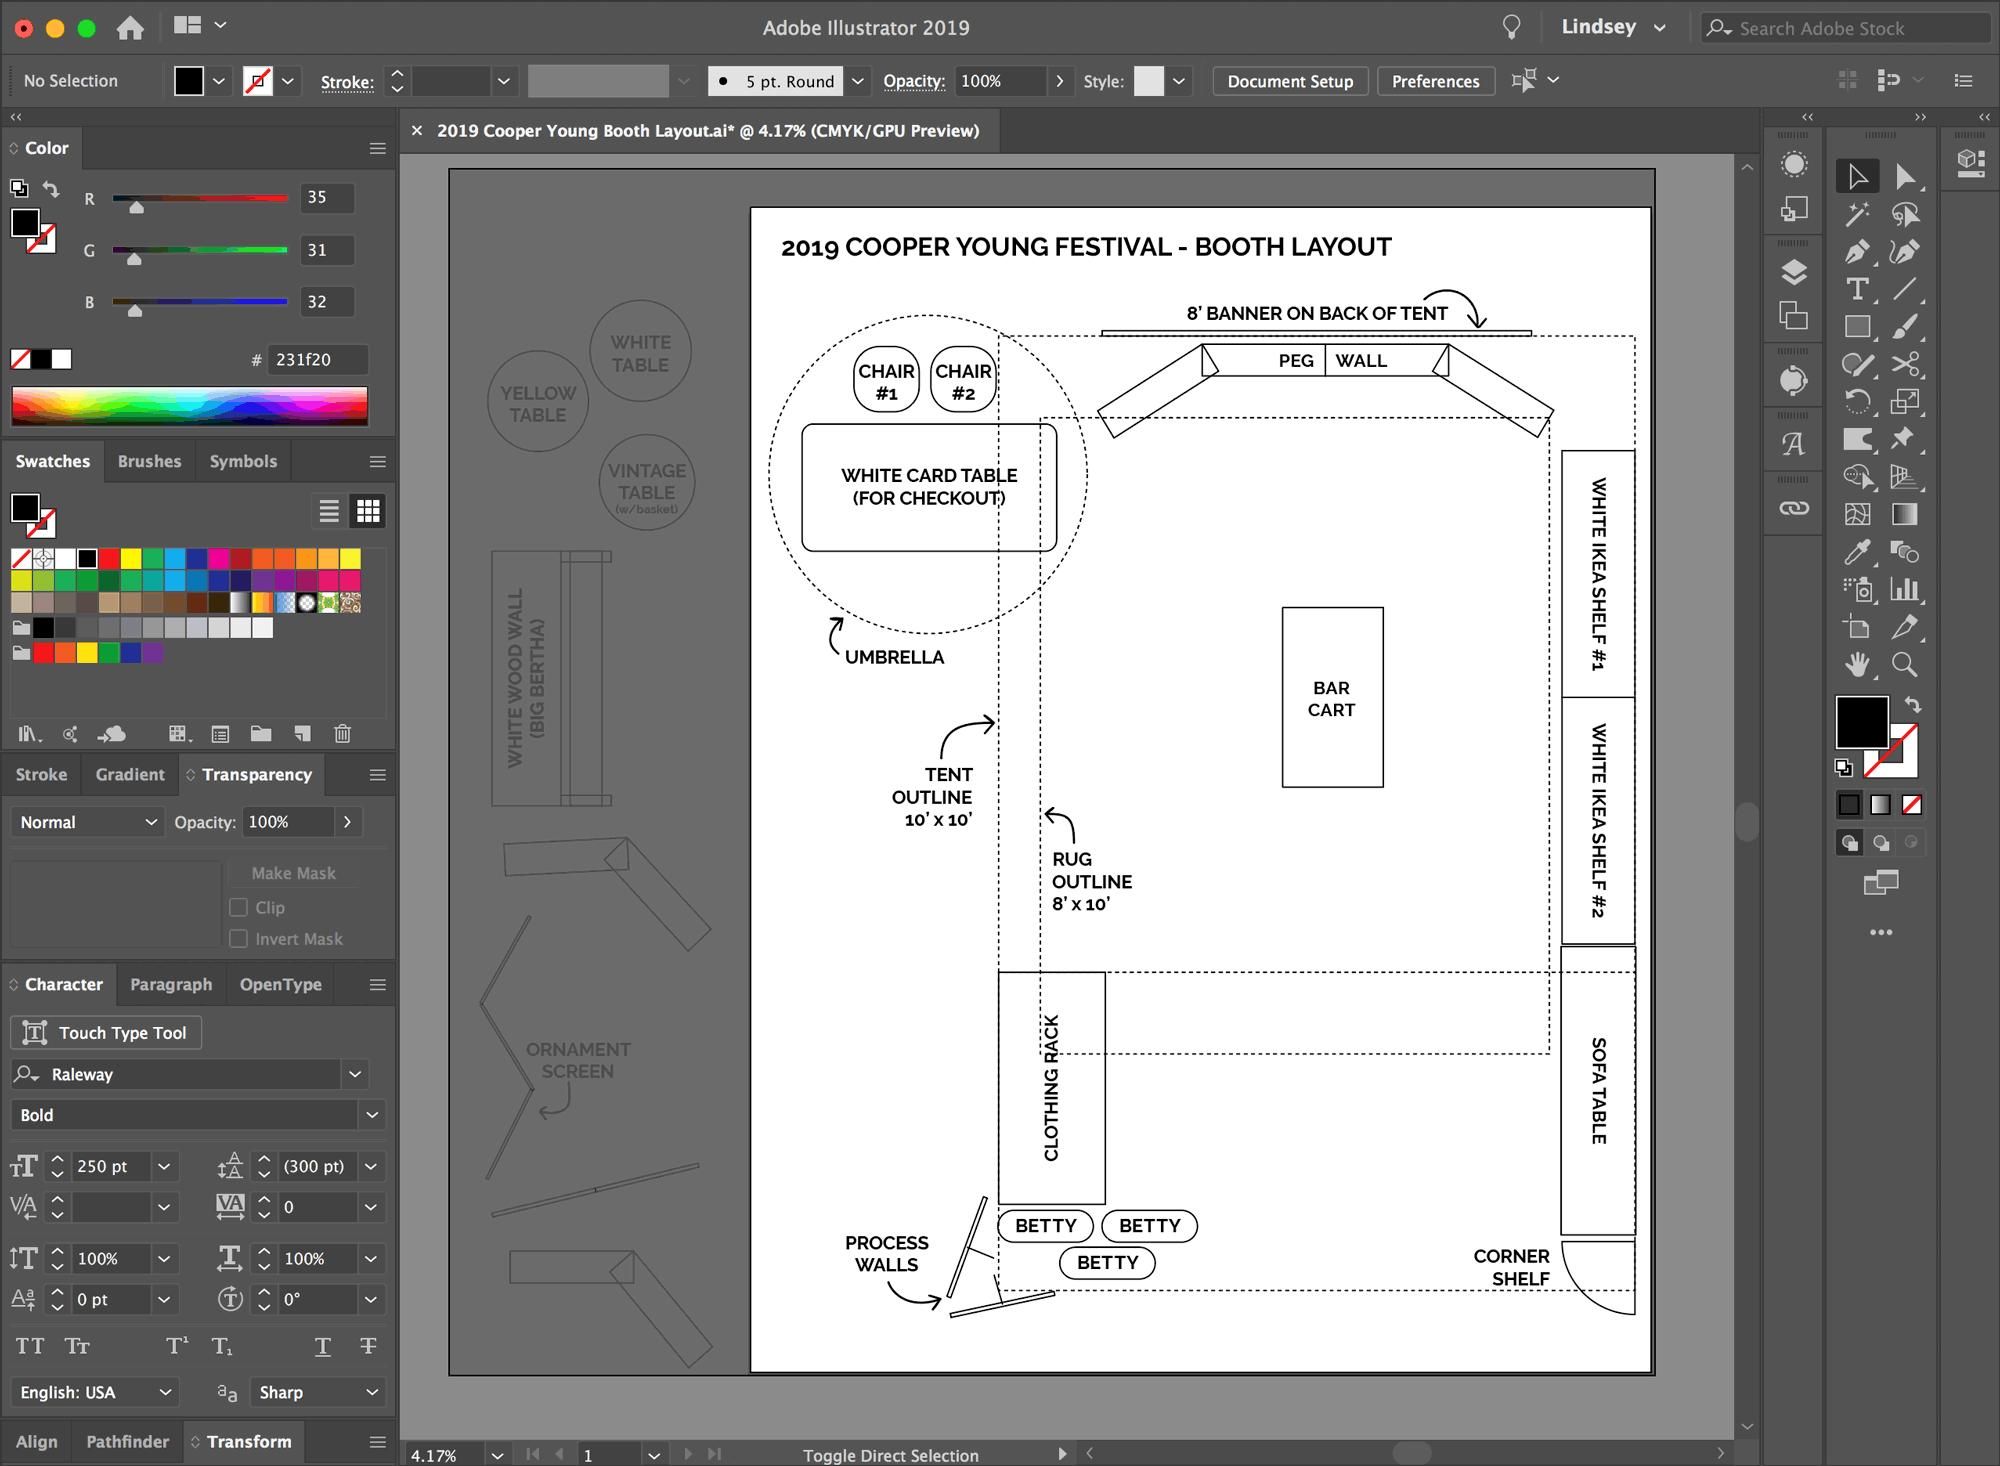 Vendor Booth layout in Adobe Illustrator by ARCHd